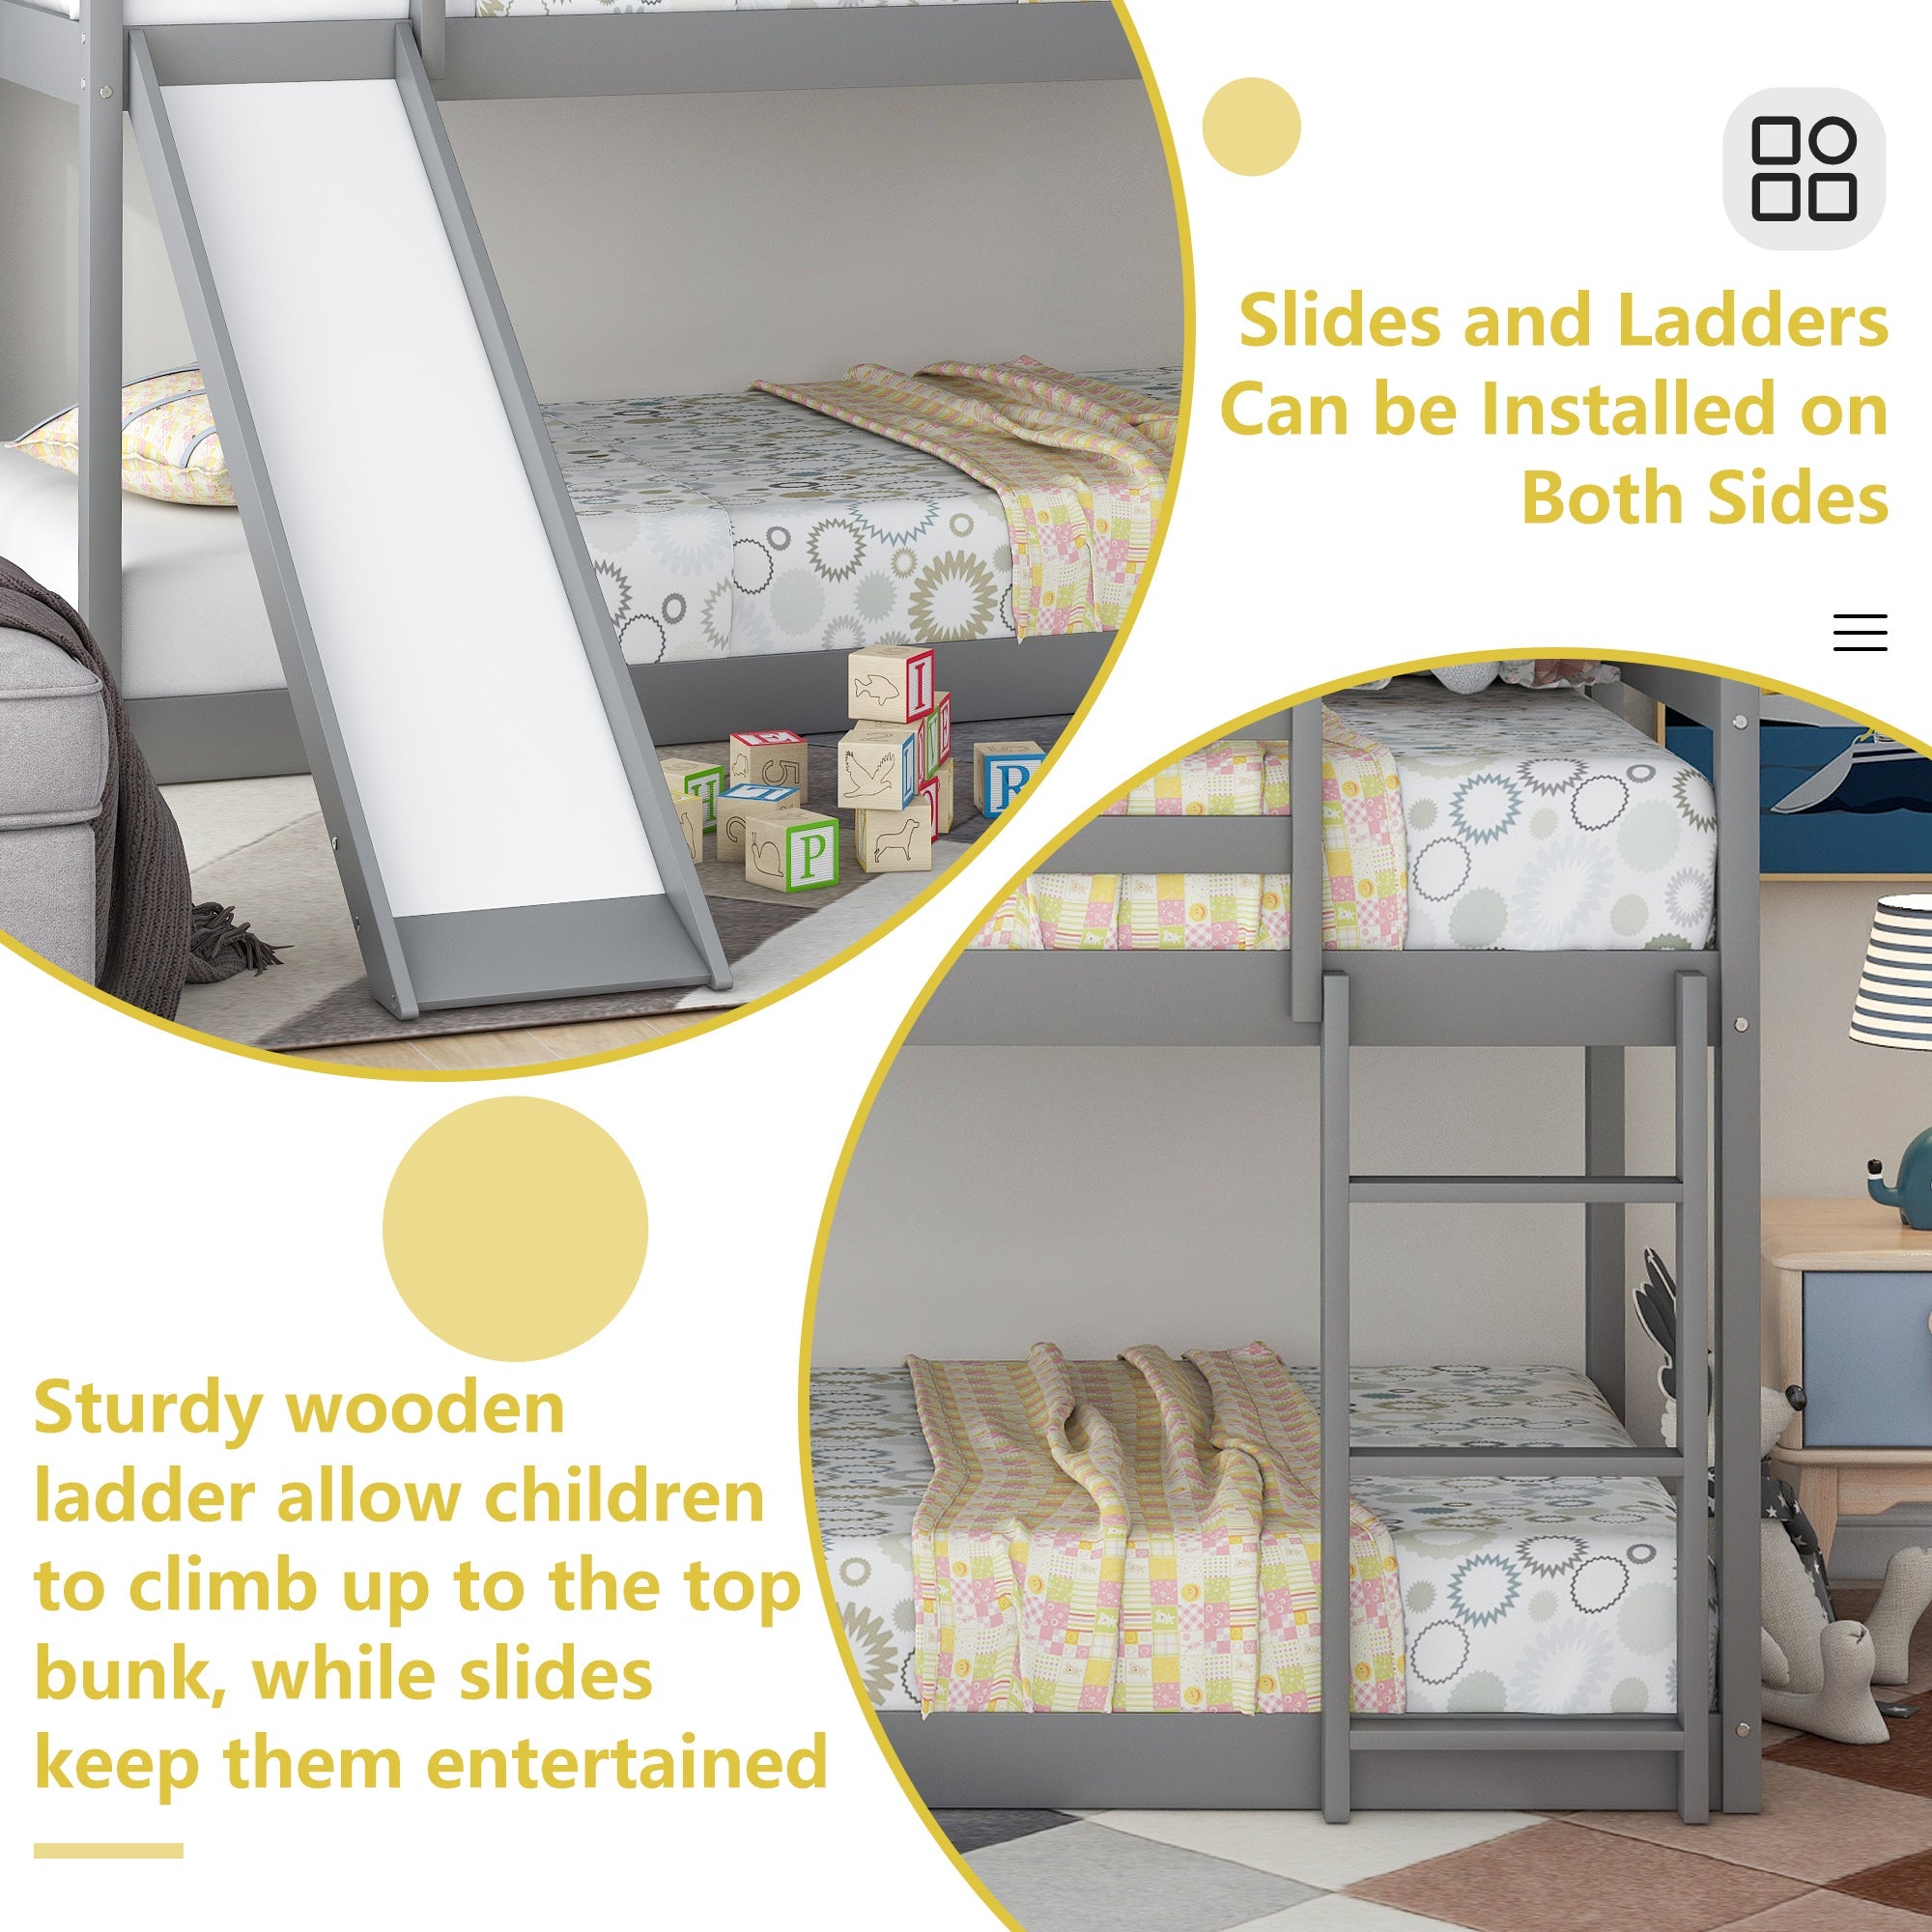 Floor Bunk Bed with Convertible Slide and Ladder, SESSLIFE Wood Bunk Beds with Guardrail for Boys Girls Toddlers, Gray Twin Over Twin Bunk Bed, Kids Floor Bunk Bed for Home Children’s Room, TE838